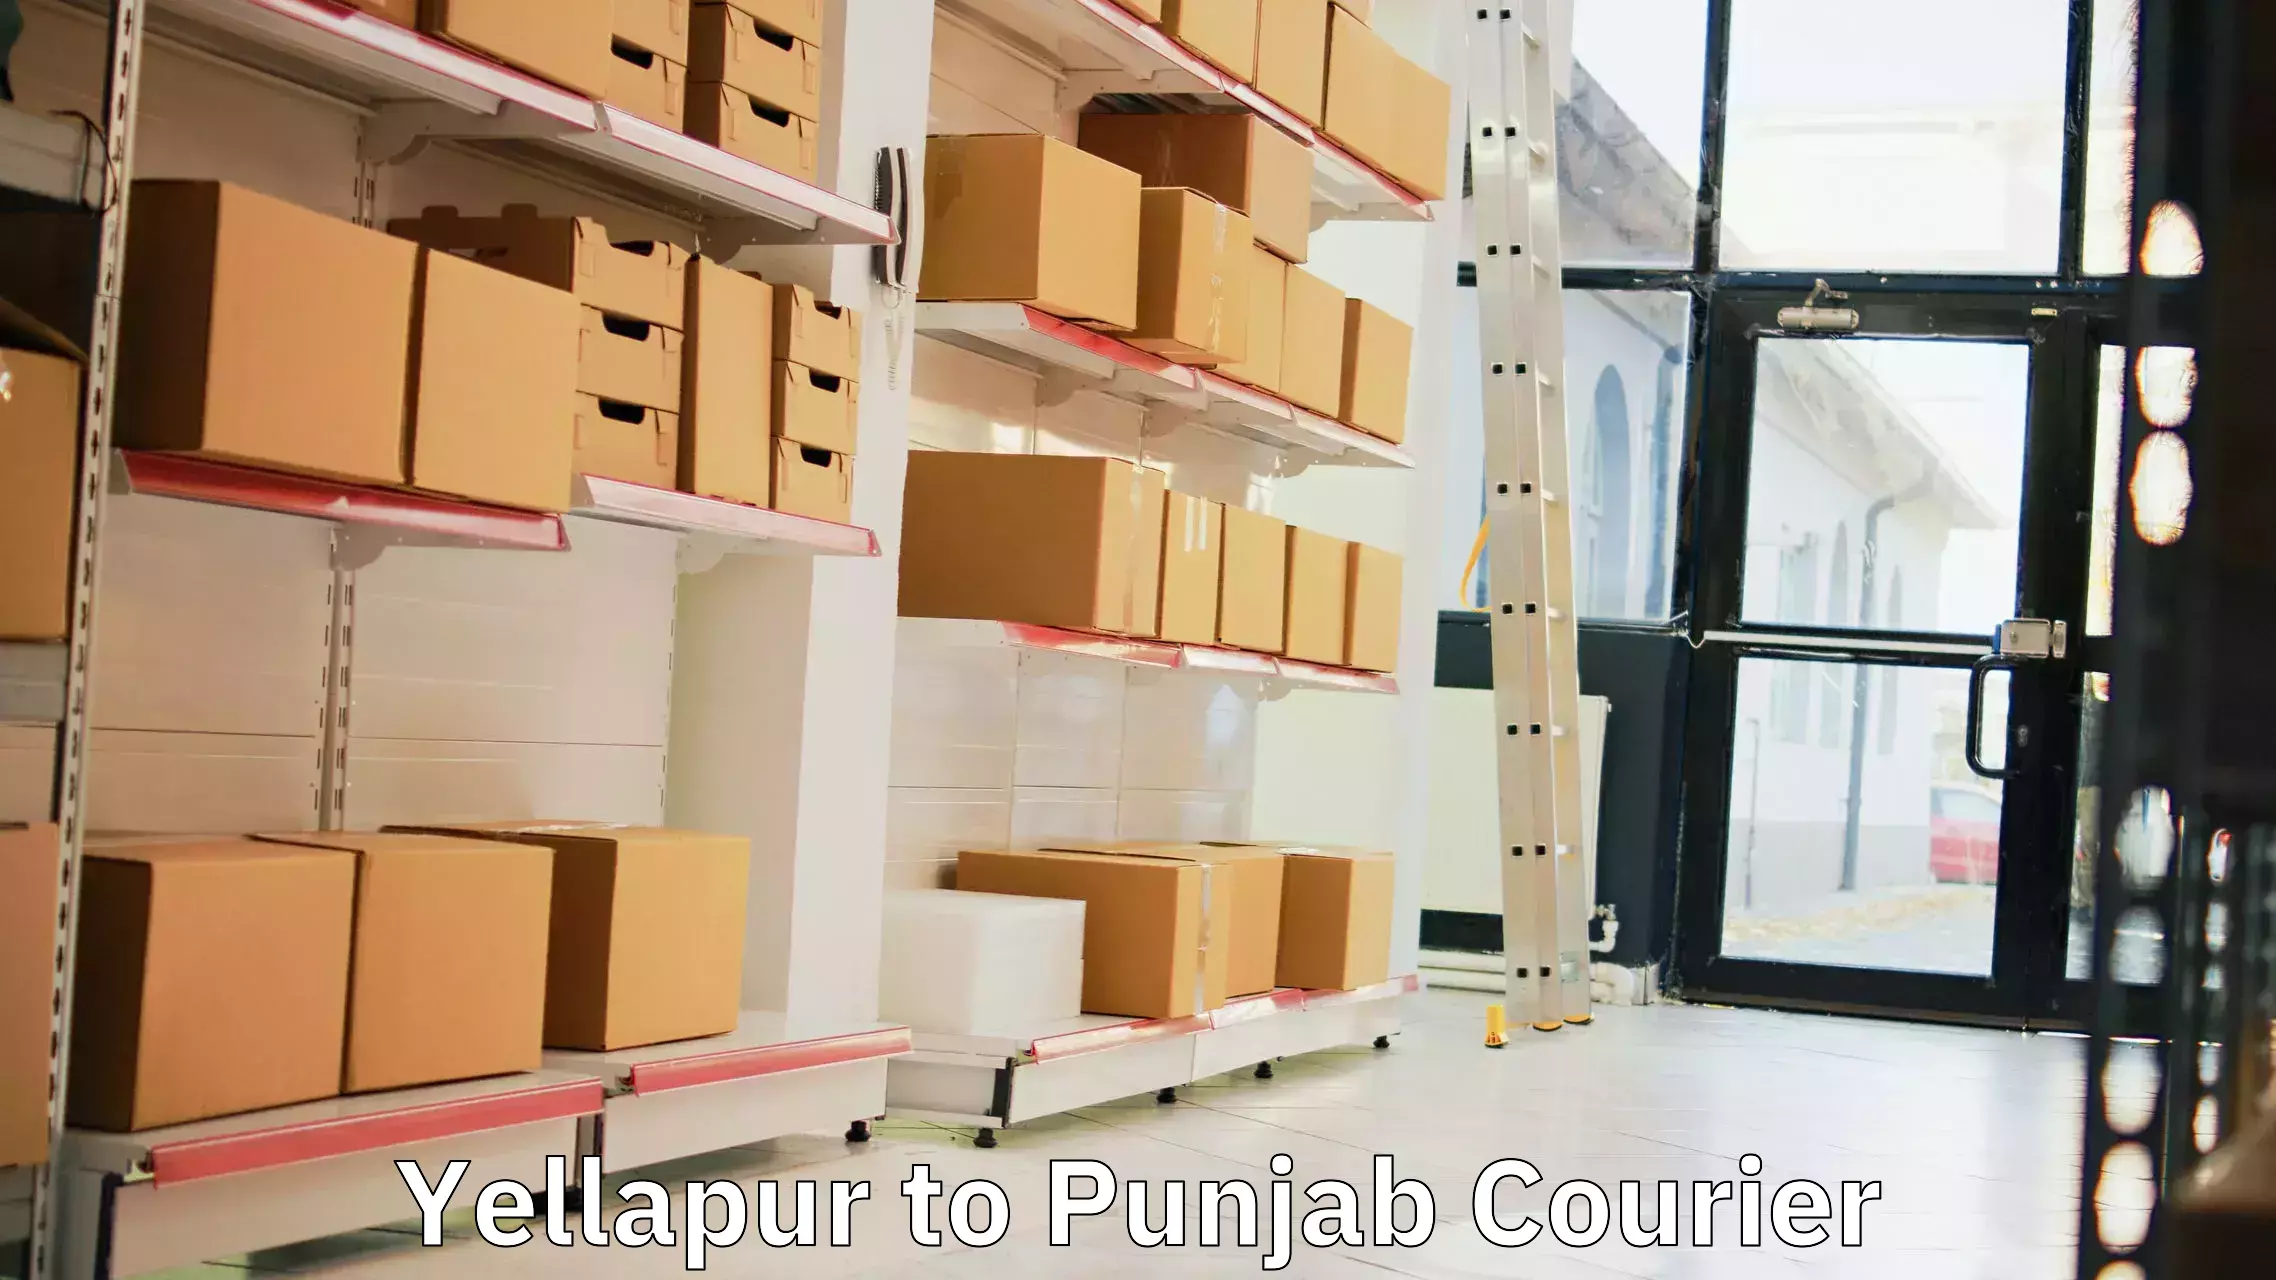 Reliable parcel services in Yellapur to Punjab